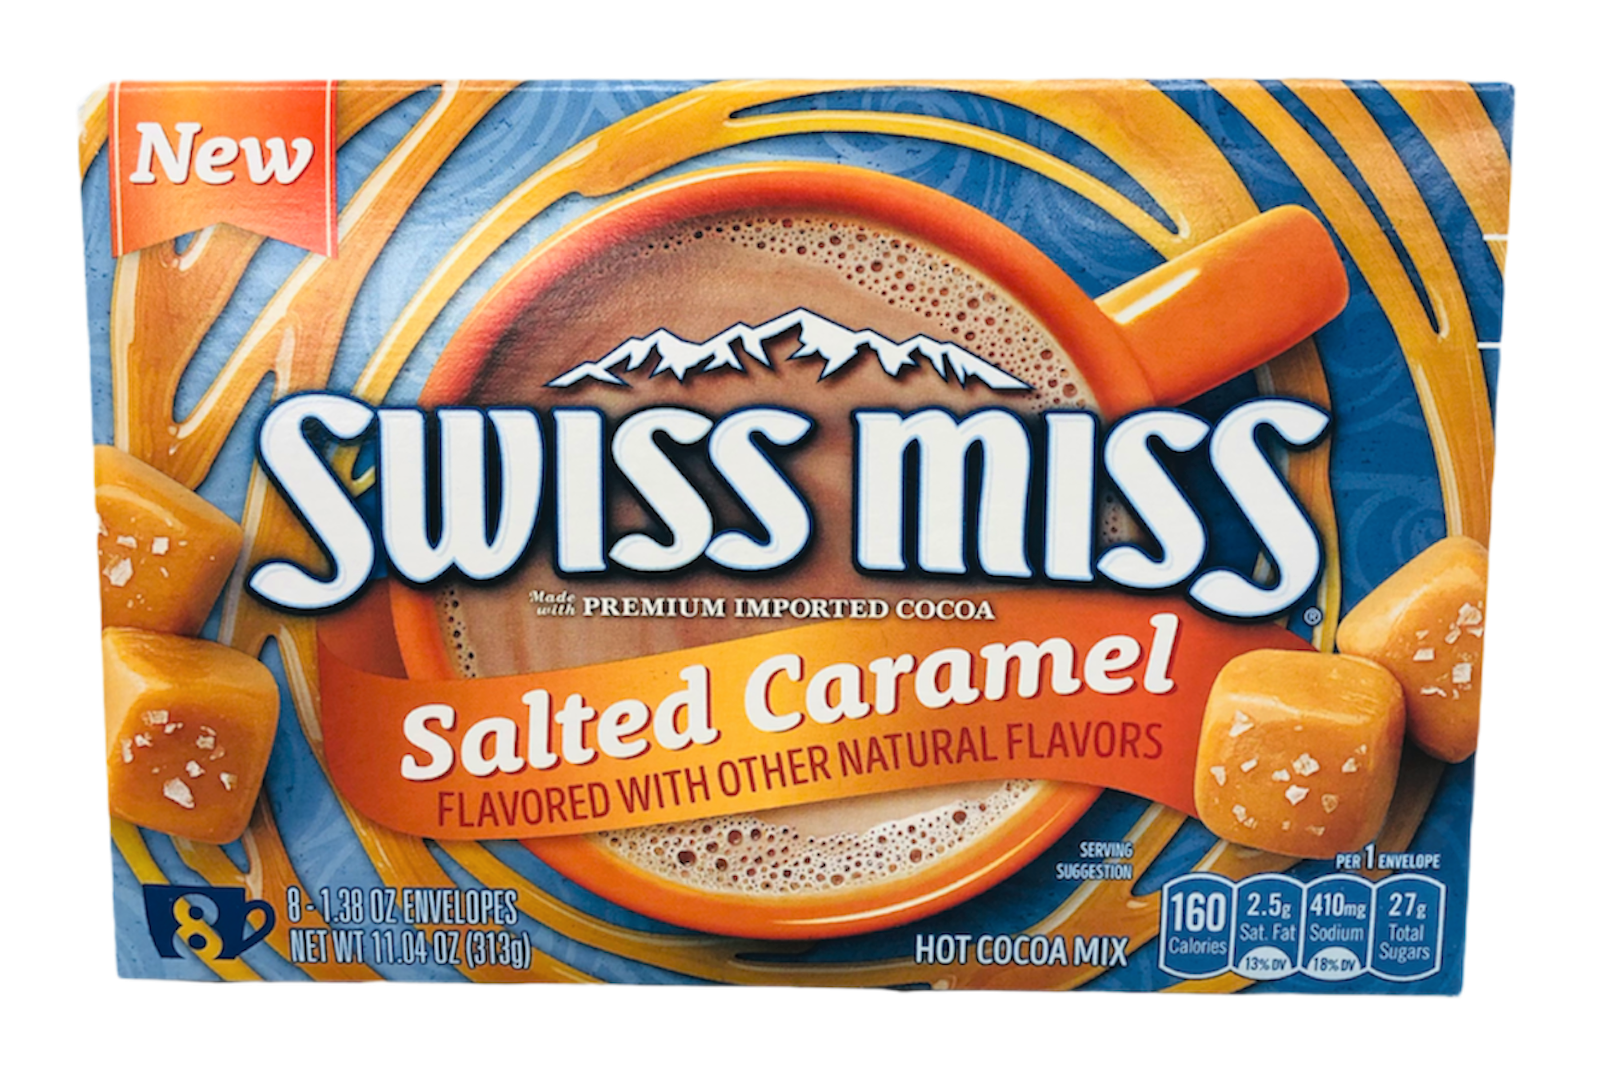 Swiss Miss Salted Caramel Hot Cocoa Mix 11.04 oz